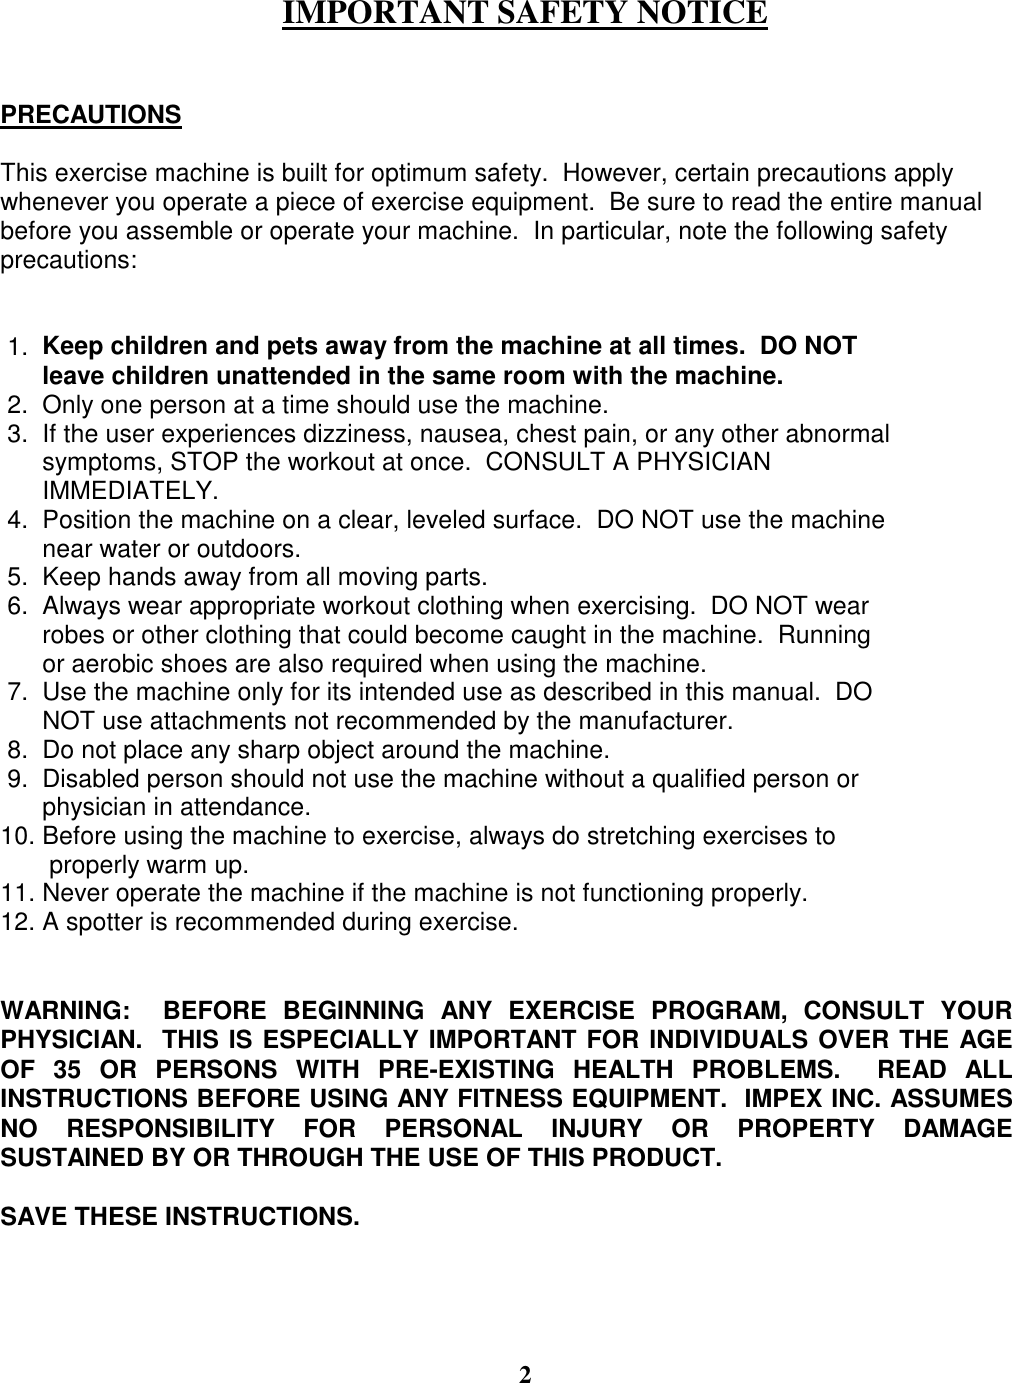 Page 3 of 11 - Impex-Fitness Impex-Fitness-Mwb-Pro5-Owners-Manual- PARTS LIST  Impex-fitness-mwb-pro5-owners-manual